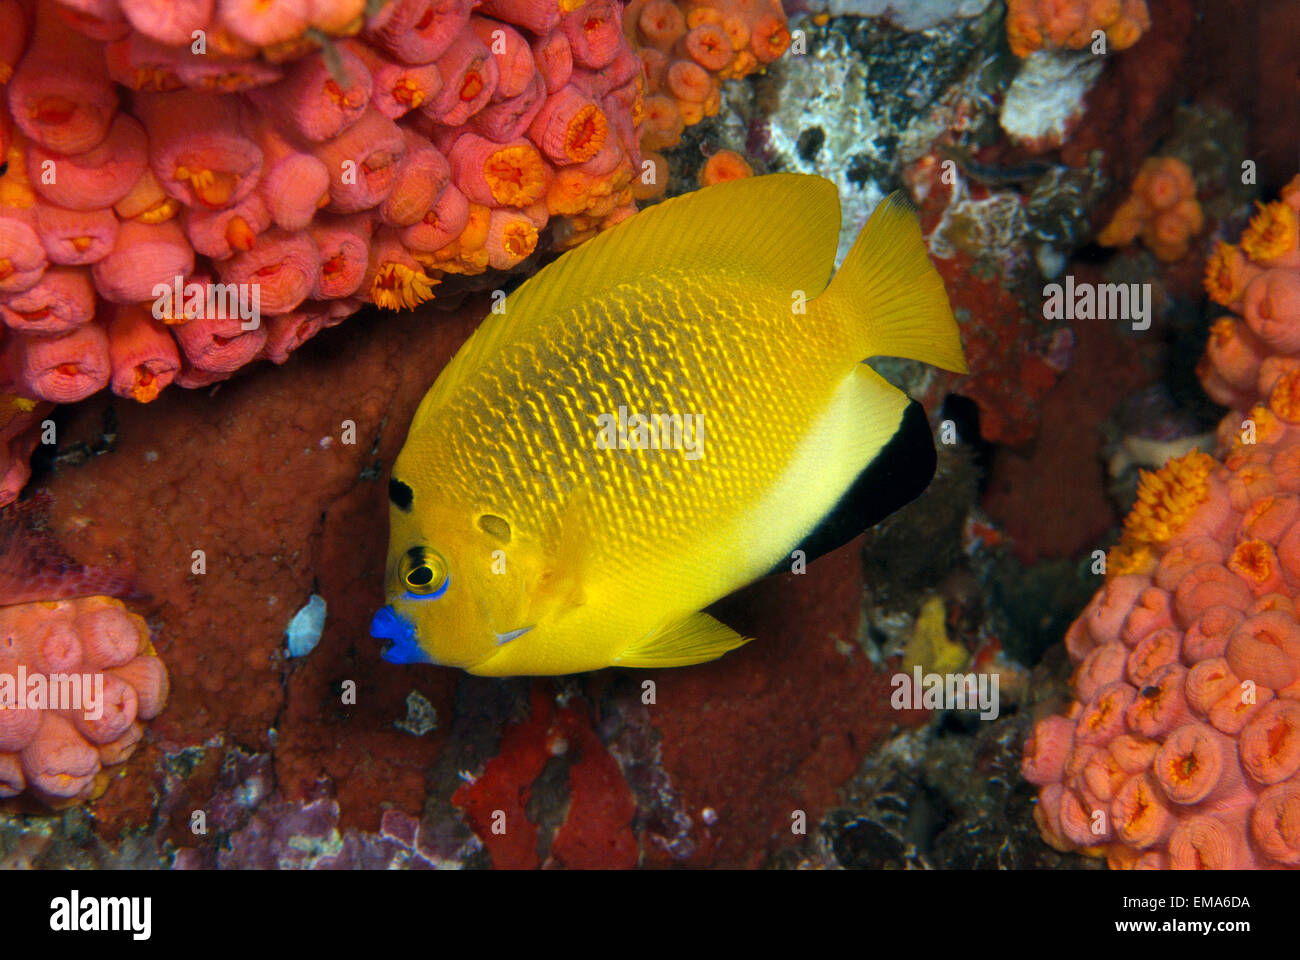 Indonesia, Three Spot Angelfish (Apolemichthys Trimaculatus) Stonycup Coral B1962 Stock Photo